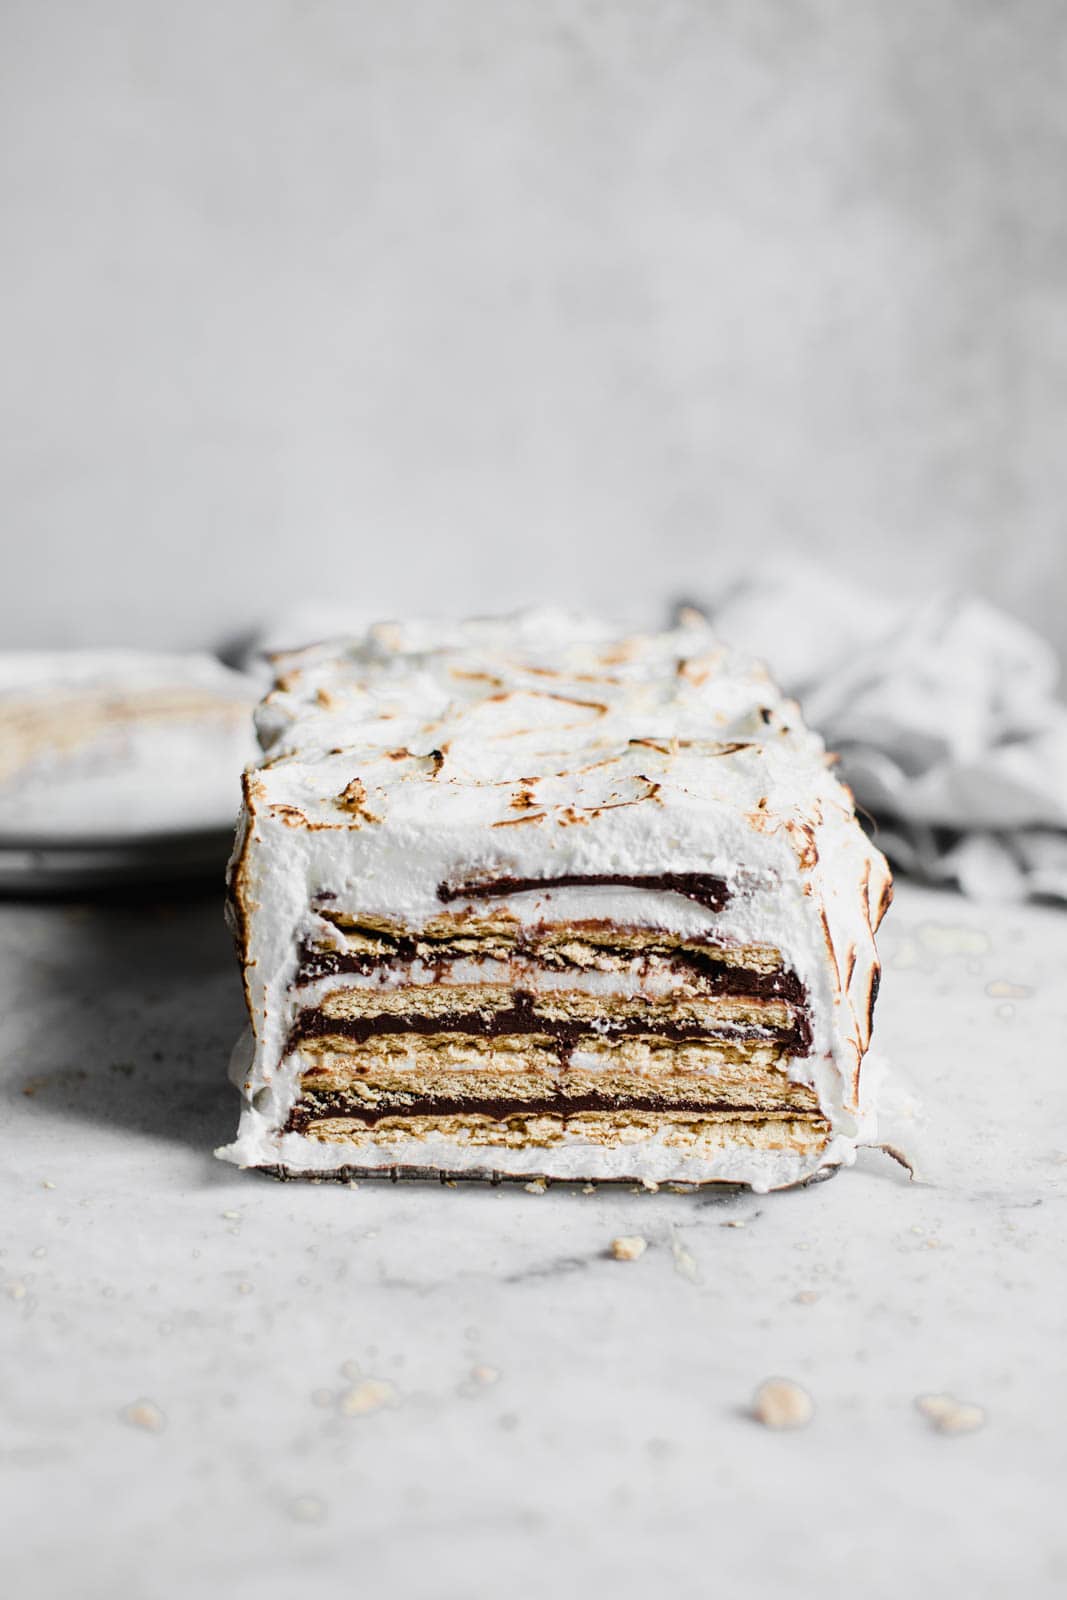 According to my boyfriend, this S'mores Ice Box Cake is "the best thing you've made all year." So yeah, you should probably make it, too.